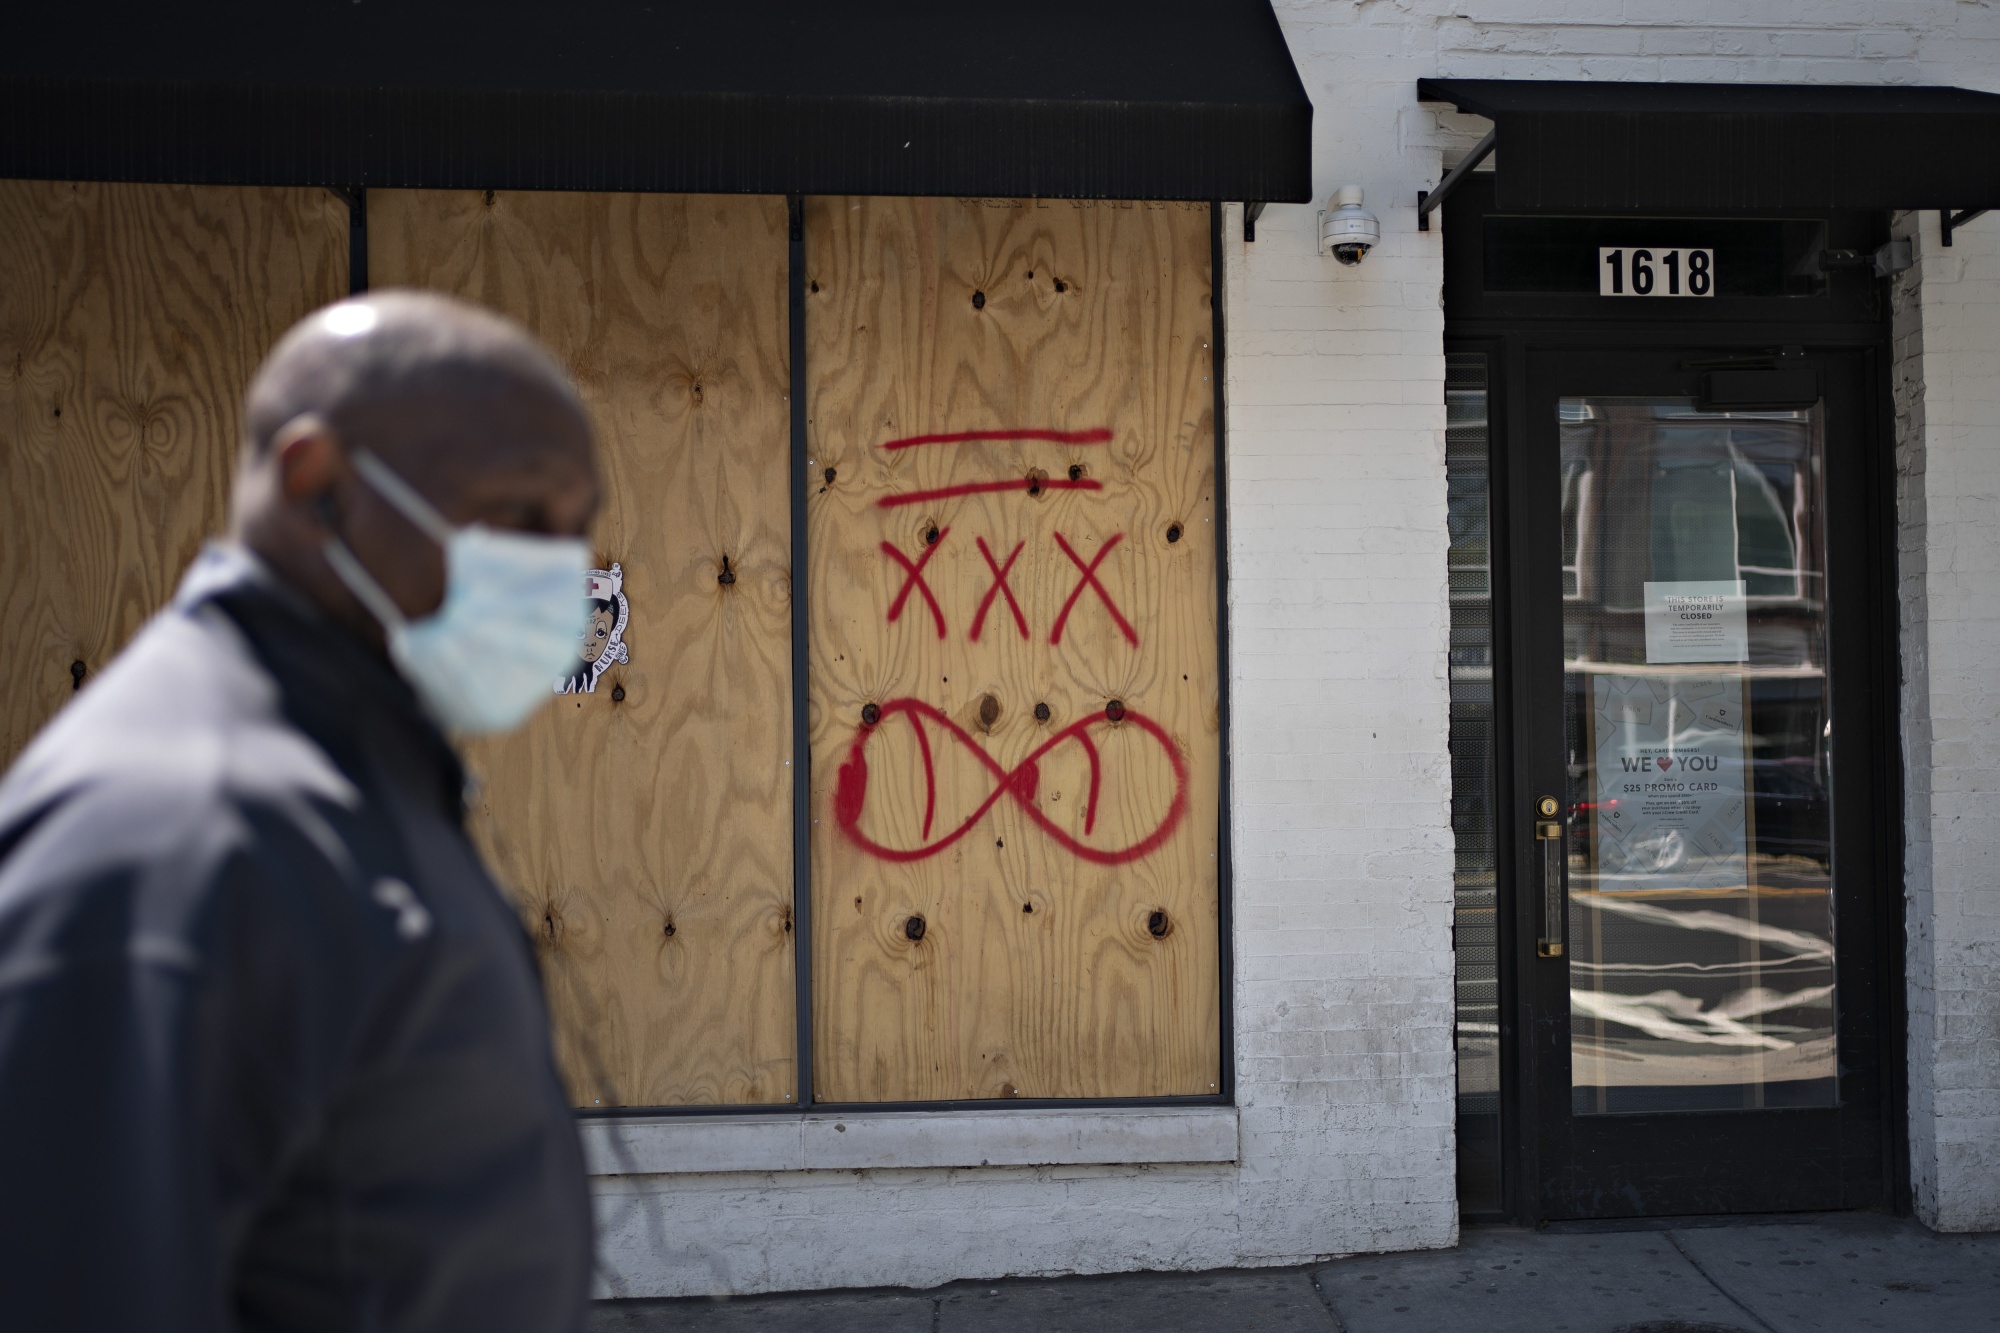 A pedestrian wearing a protective mask walks past a boarded up J. Crew Group Inc. store in Washington, D.C.